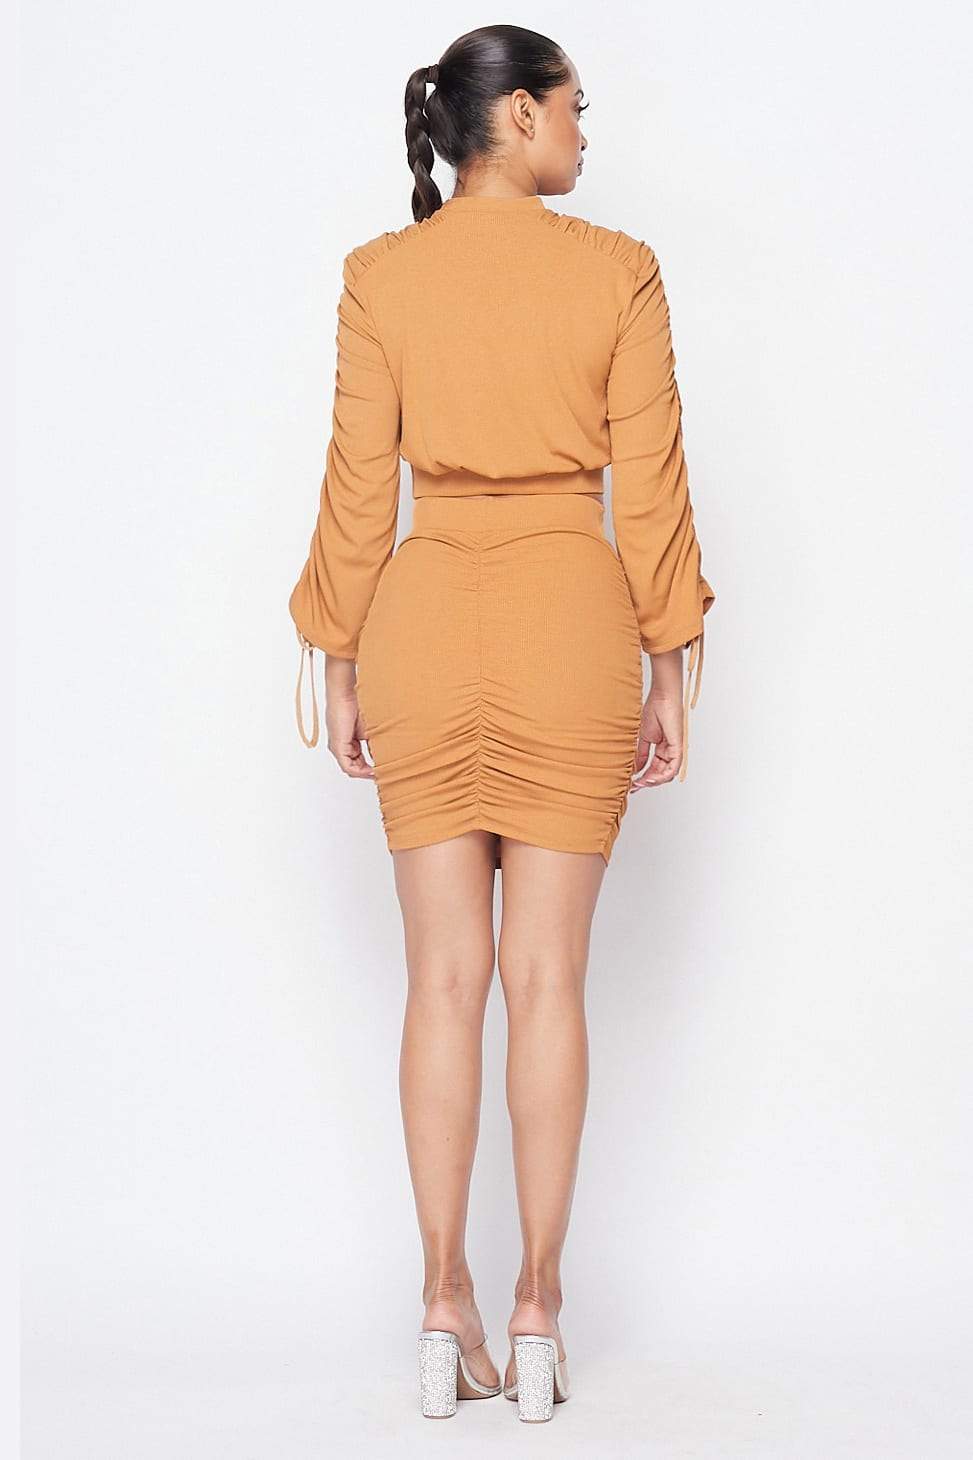 Ruched Long Sleeves Top And Skirt Set Ruched Long Sleeves Top And Skirt Set - M&R CORNER M&R CORNER Camel / S